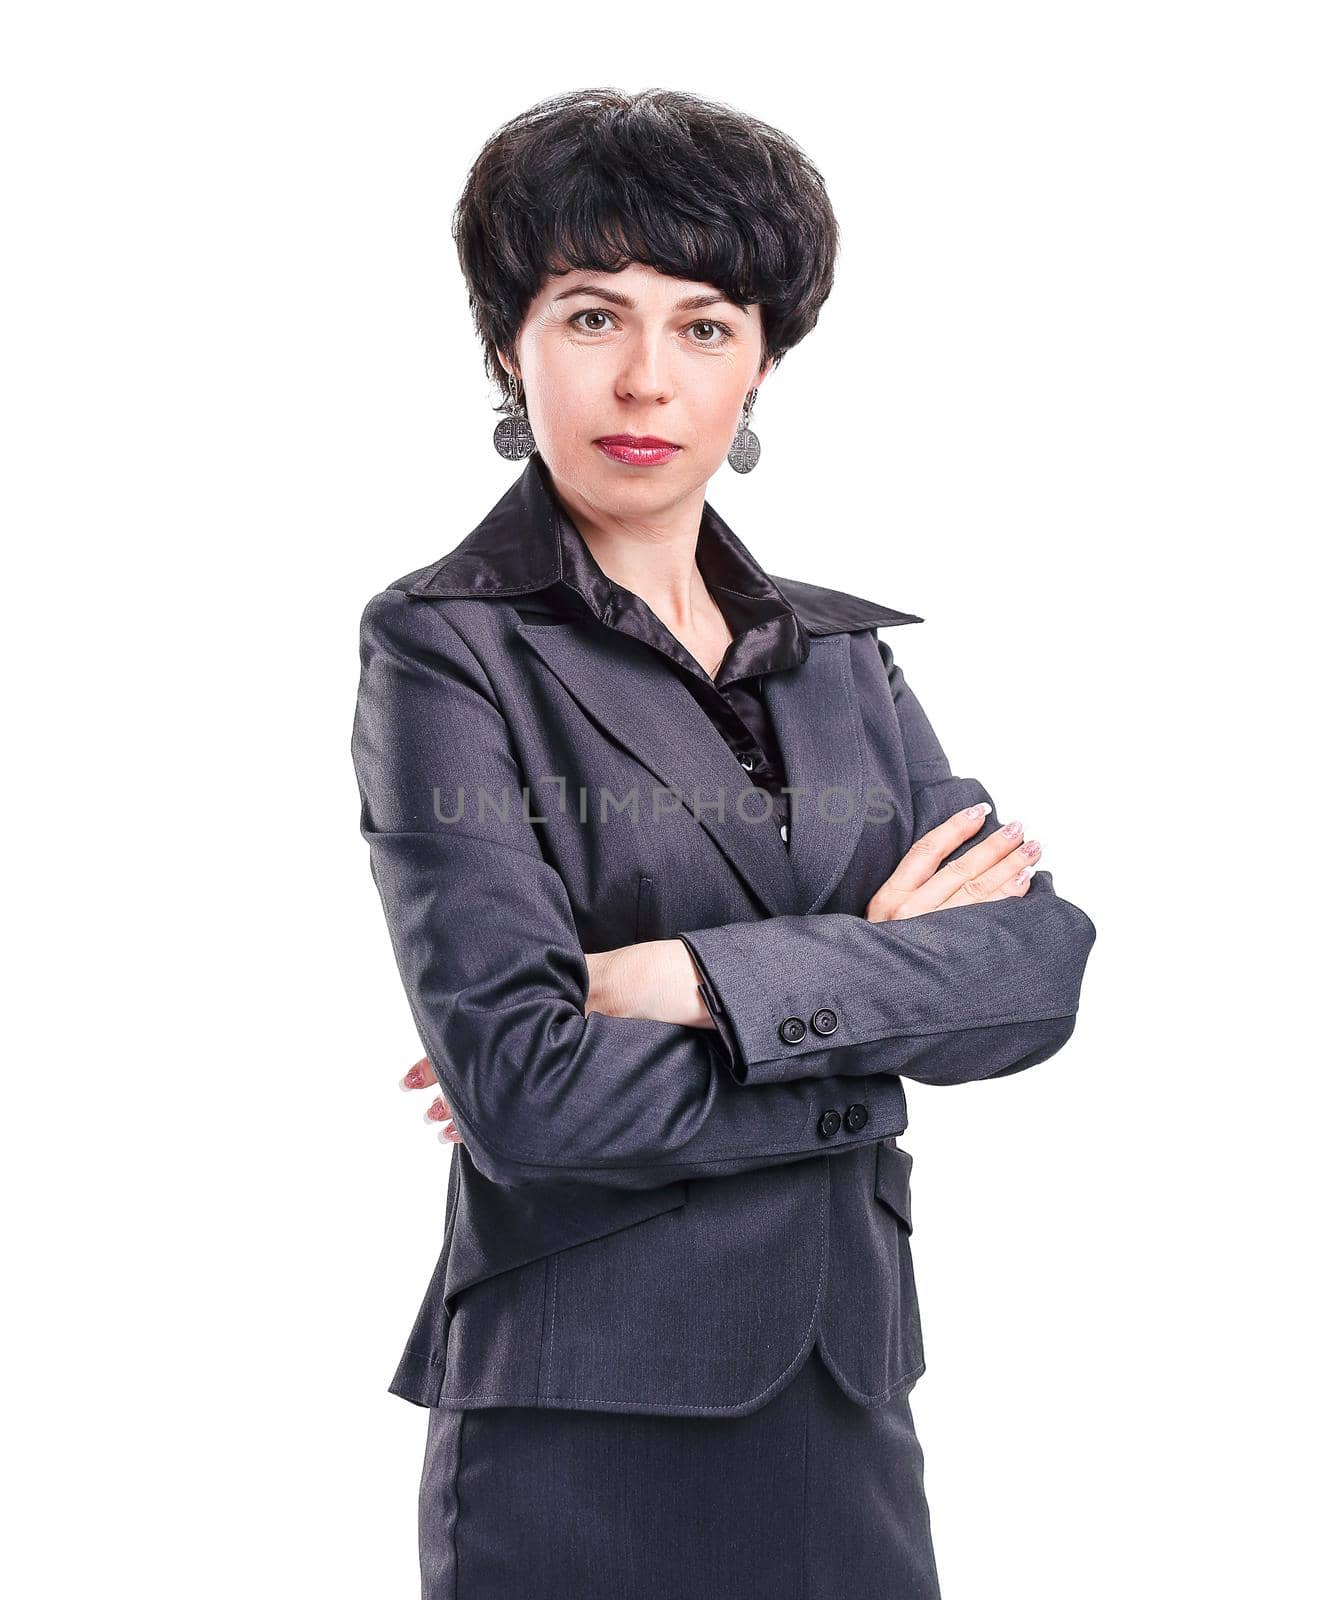 confident business woman isolated on white background. photo with copy space